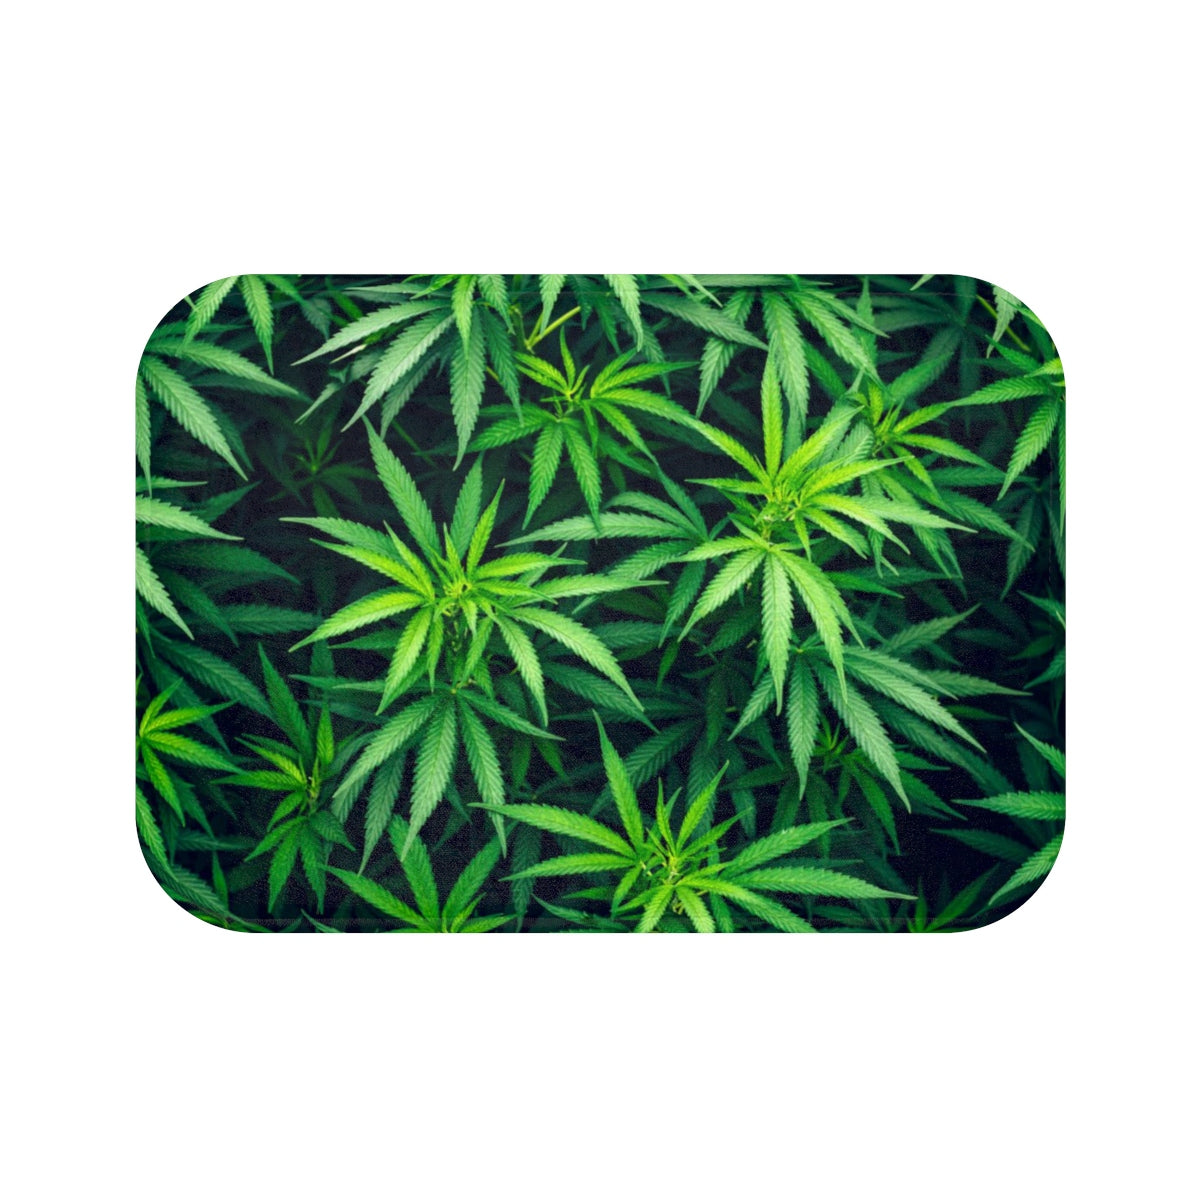 My Cannabis Custom Designed Shower Mat.  A Unique Cannabis Gift For Friends & Family. Cannabis Decor For Your Home.